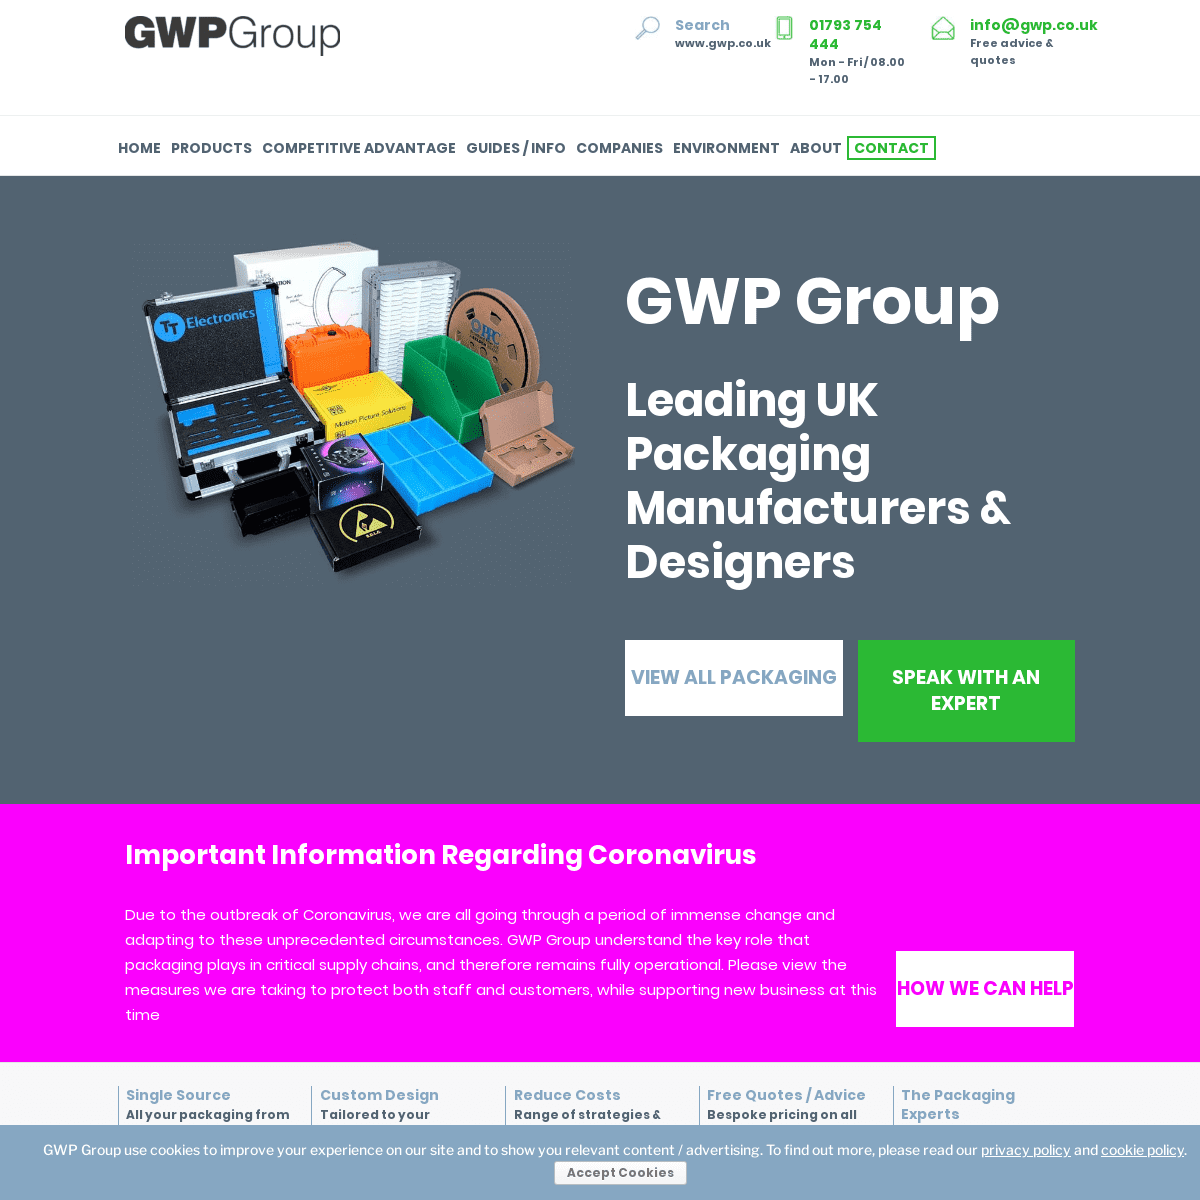 A complete backup of gwp.co.uk